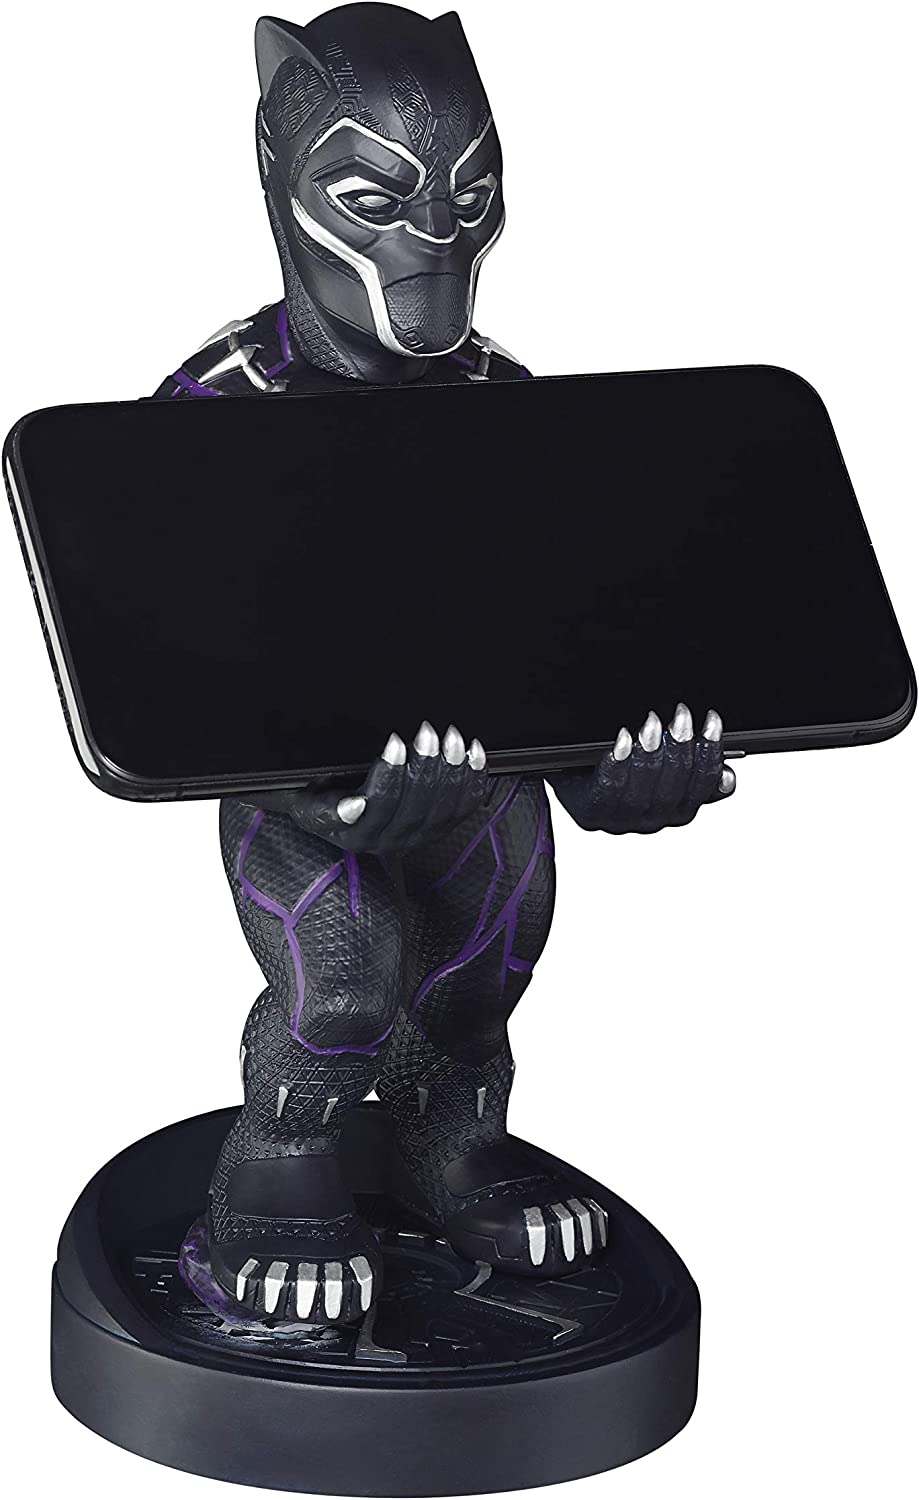 Black Panther Cable Guys Phone and Controller Holder